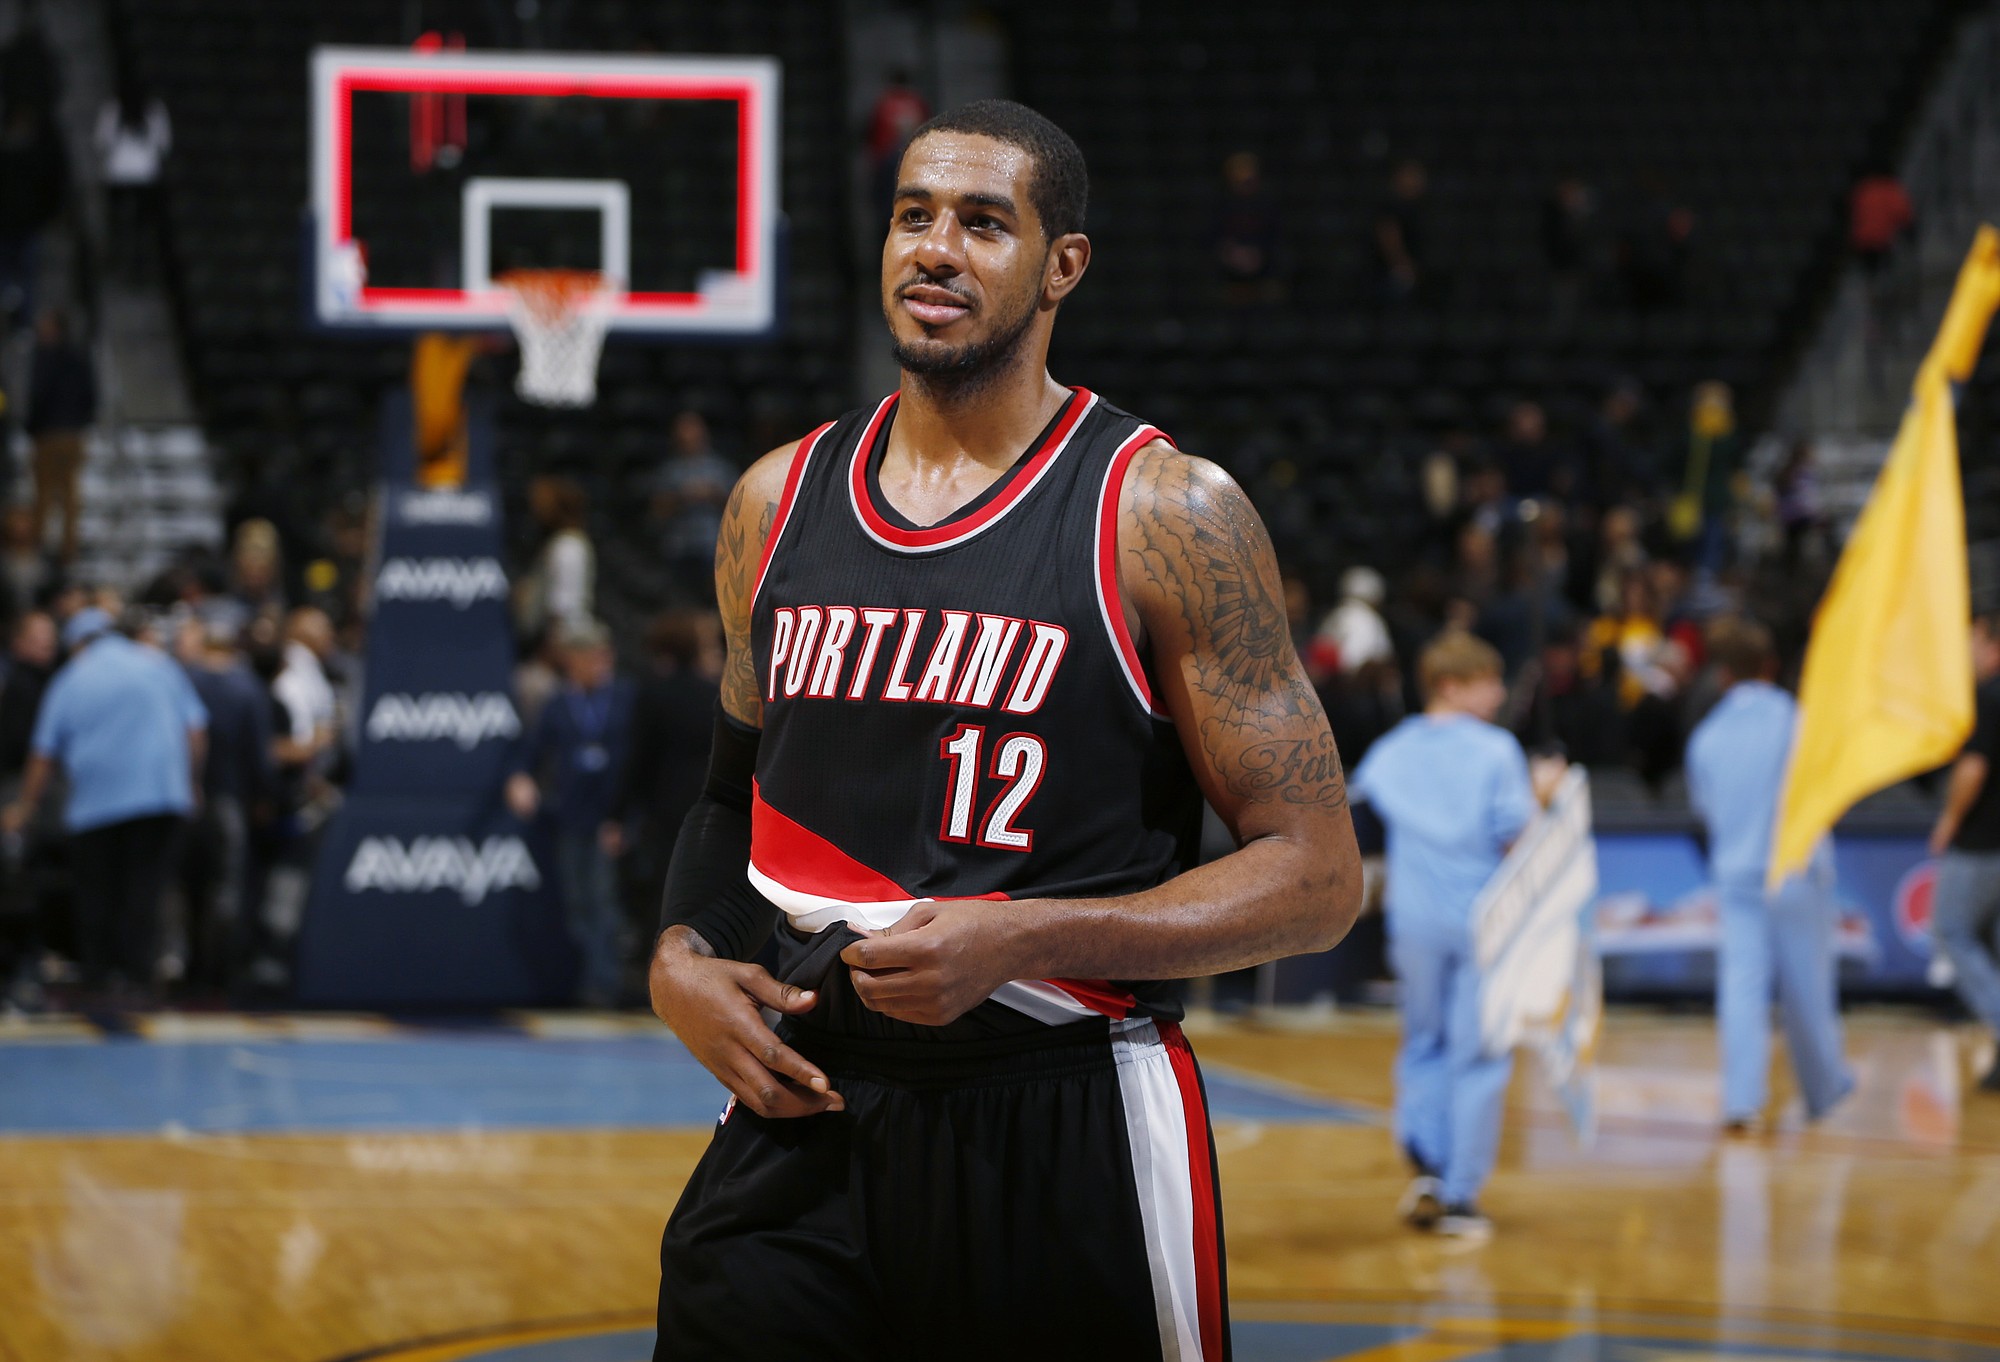 Portland Trail Blazers forward LaMarcus Aldridge leaves the court after scoring 39 points against the Denver Nuggets in the Trail Blazers' 105-103 victory in Denver on Tuesday.